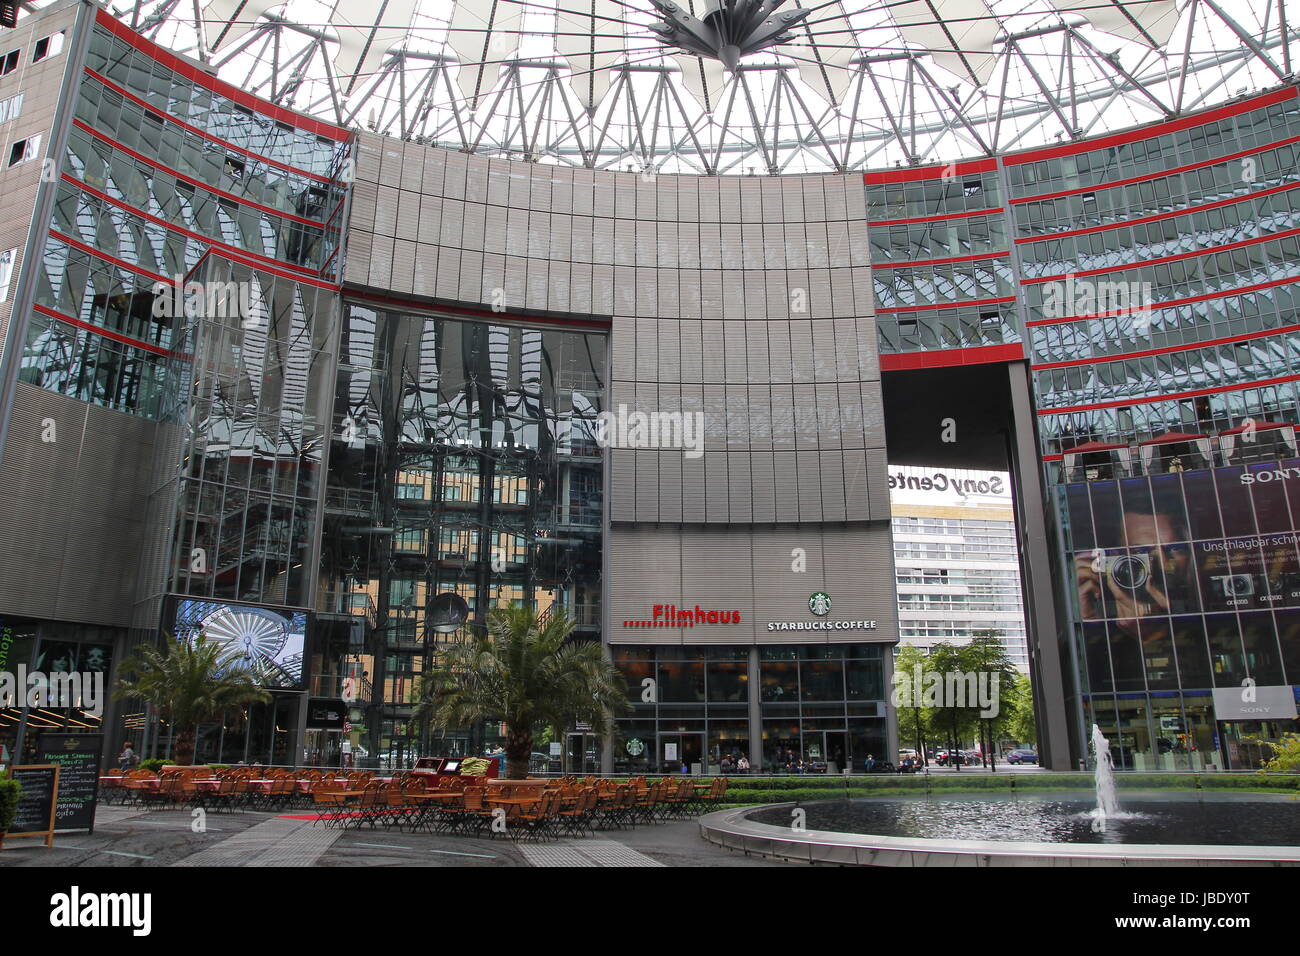 The Sony Center building, a modern complex located at the Potsdamer Platz  in Berlin, Germany. It houses Sony's German Stock Photo - Alamy